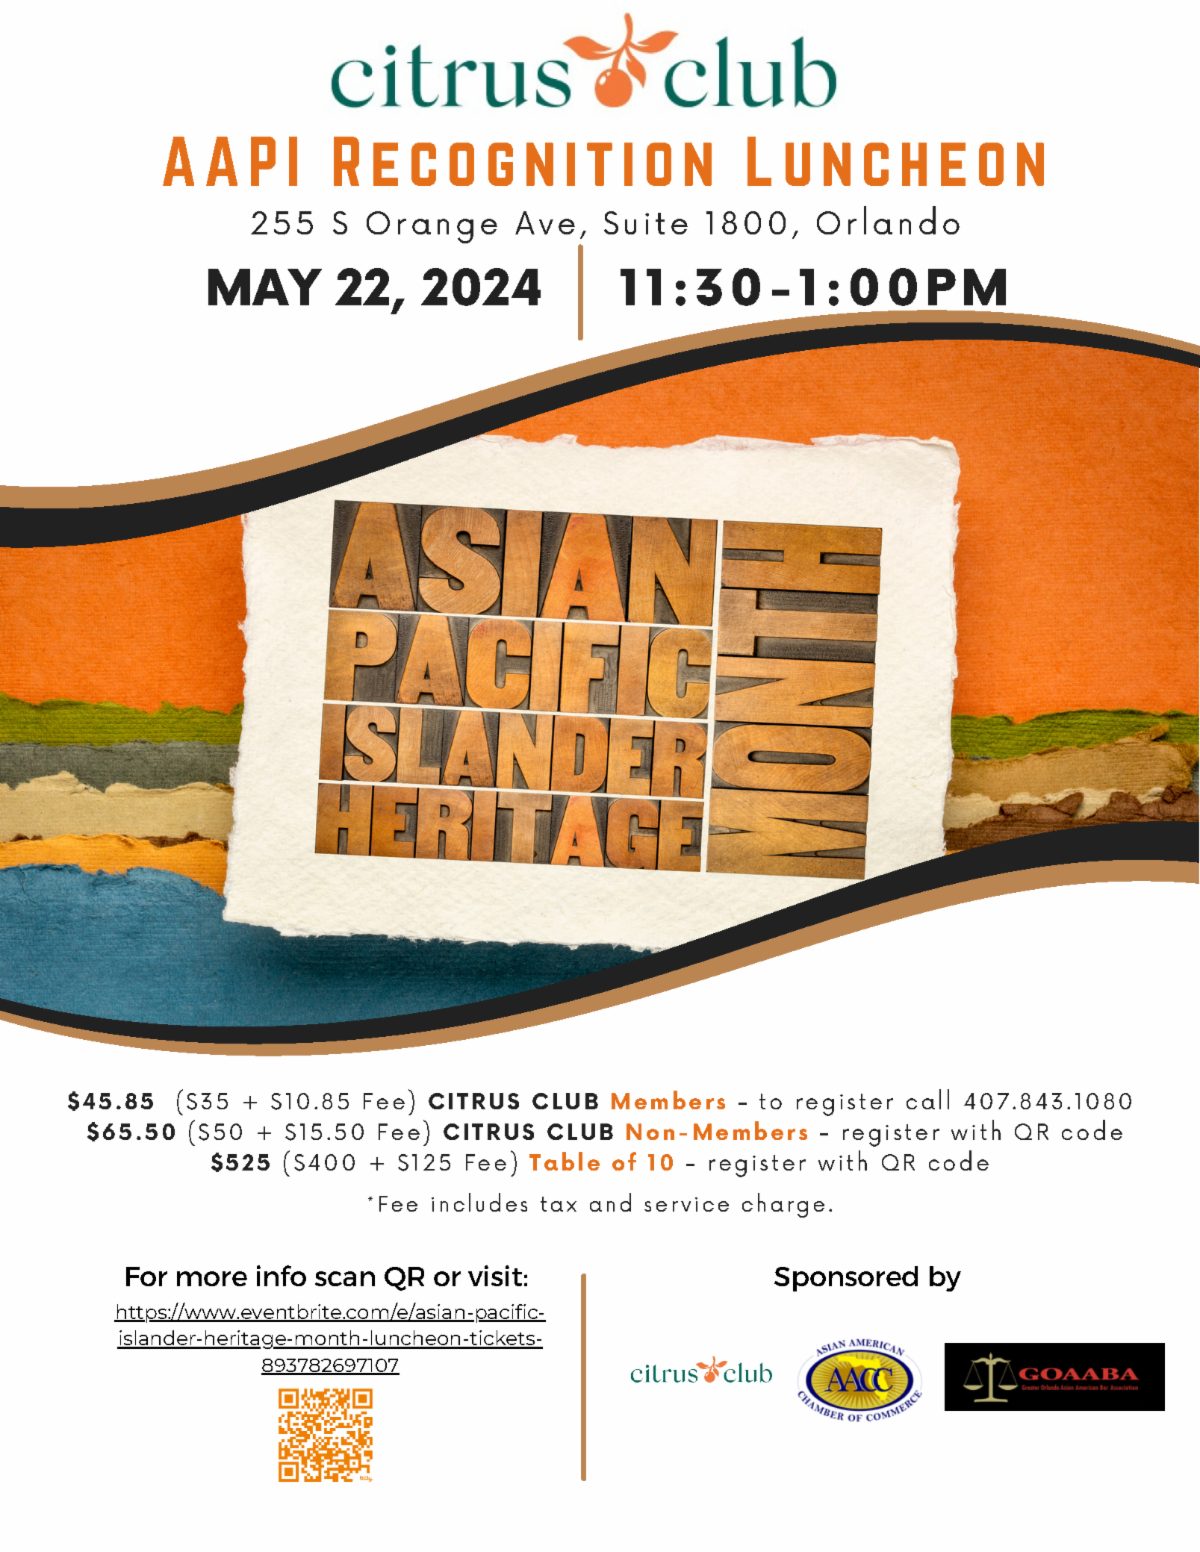 Asian Pacific Islander Heritage Month Luncheon